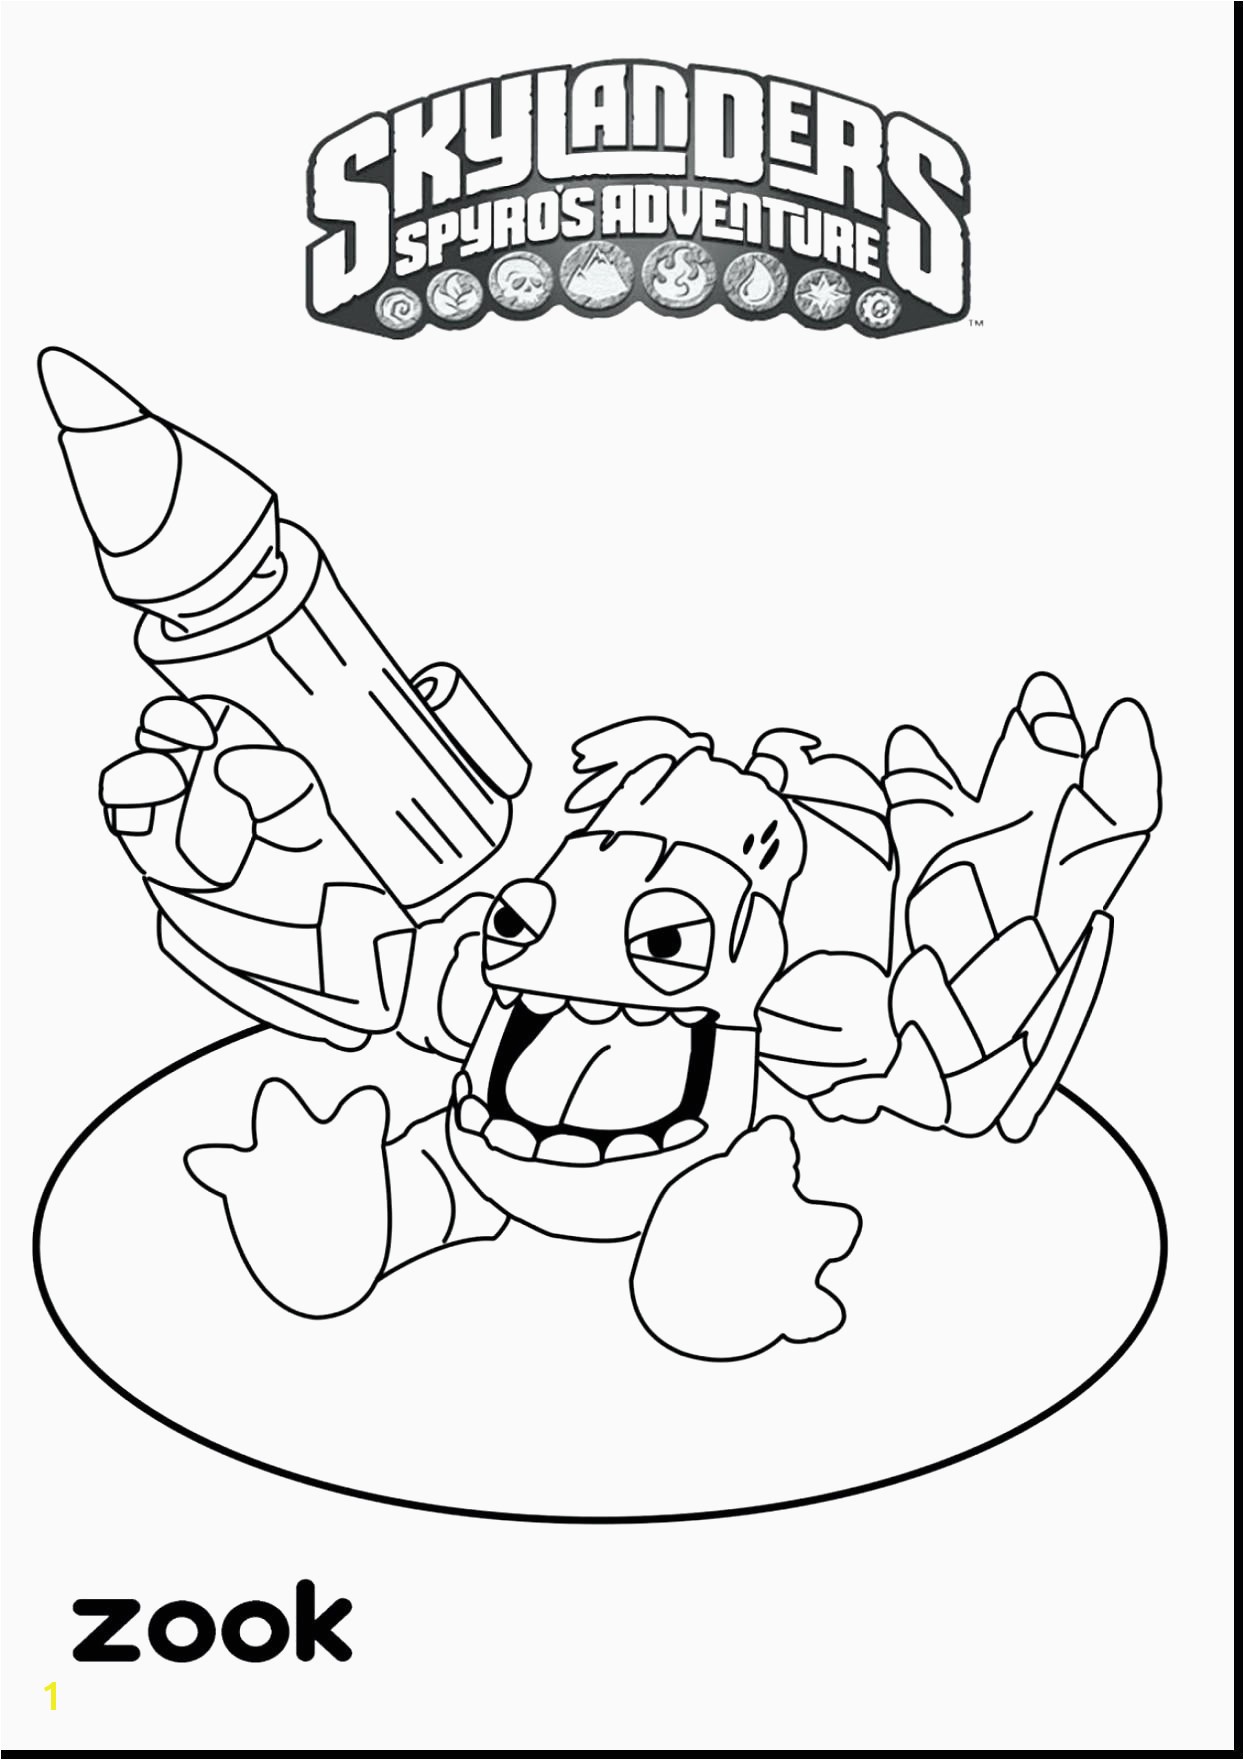 Autumn Coloring Pages New Preschool Coloring Pages Fresh Fall Coloring Pages 0d Page for Kids